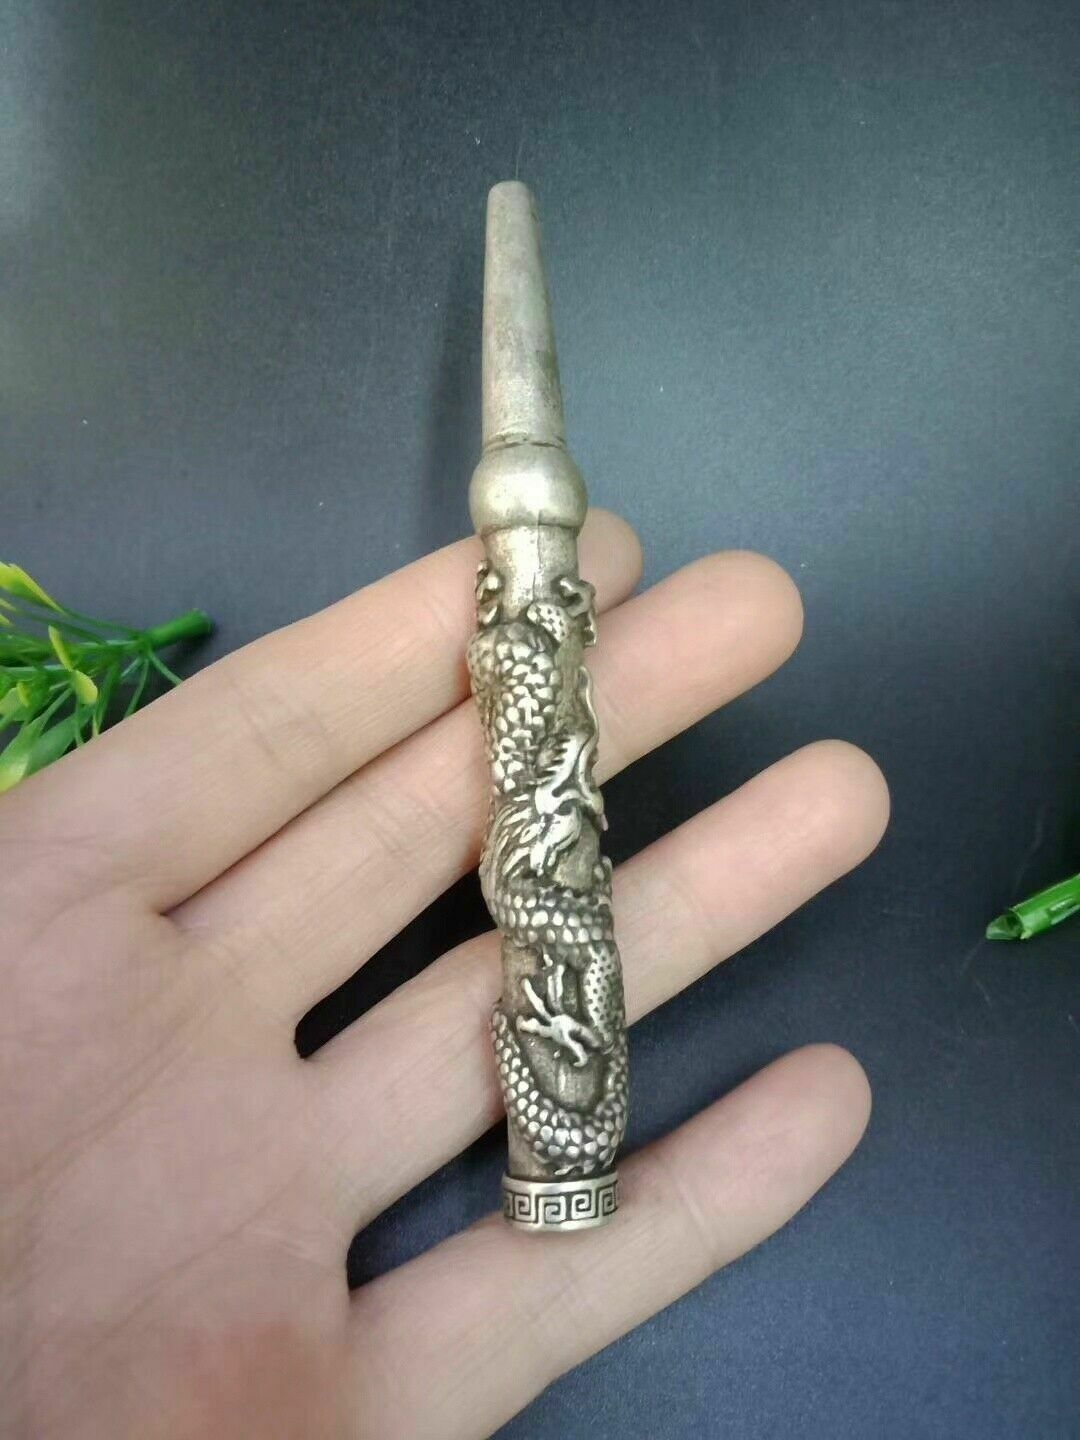  Old Chinese Tibet Silver hand-Carved Dragon cigarette holder Smoking tools 